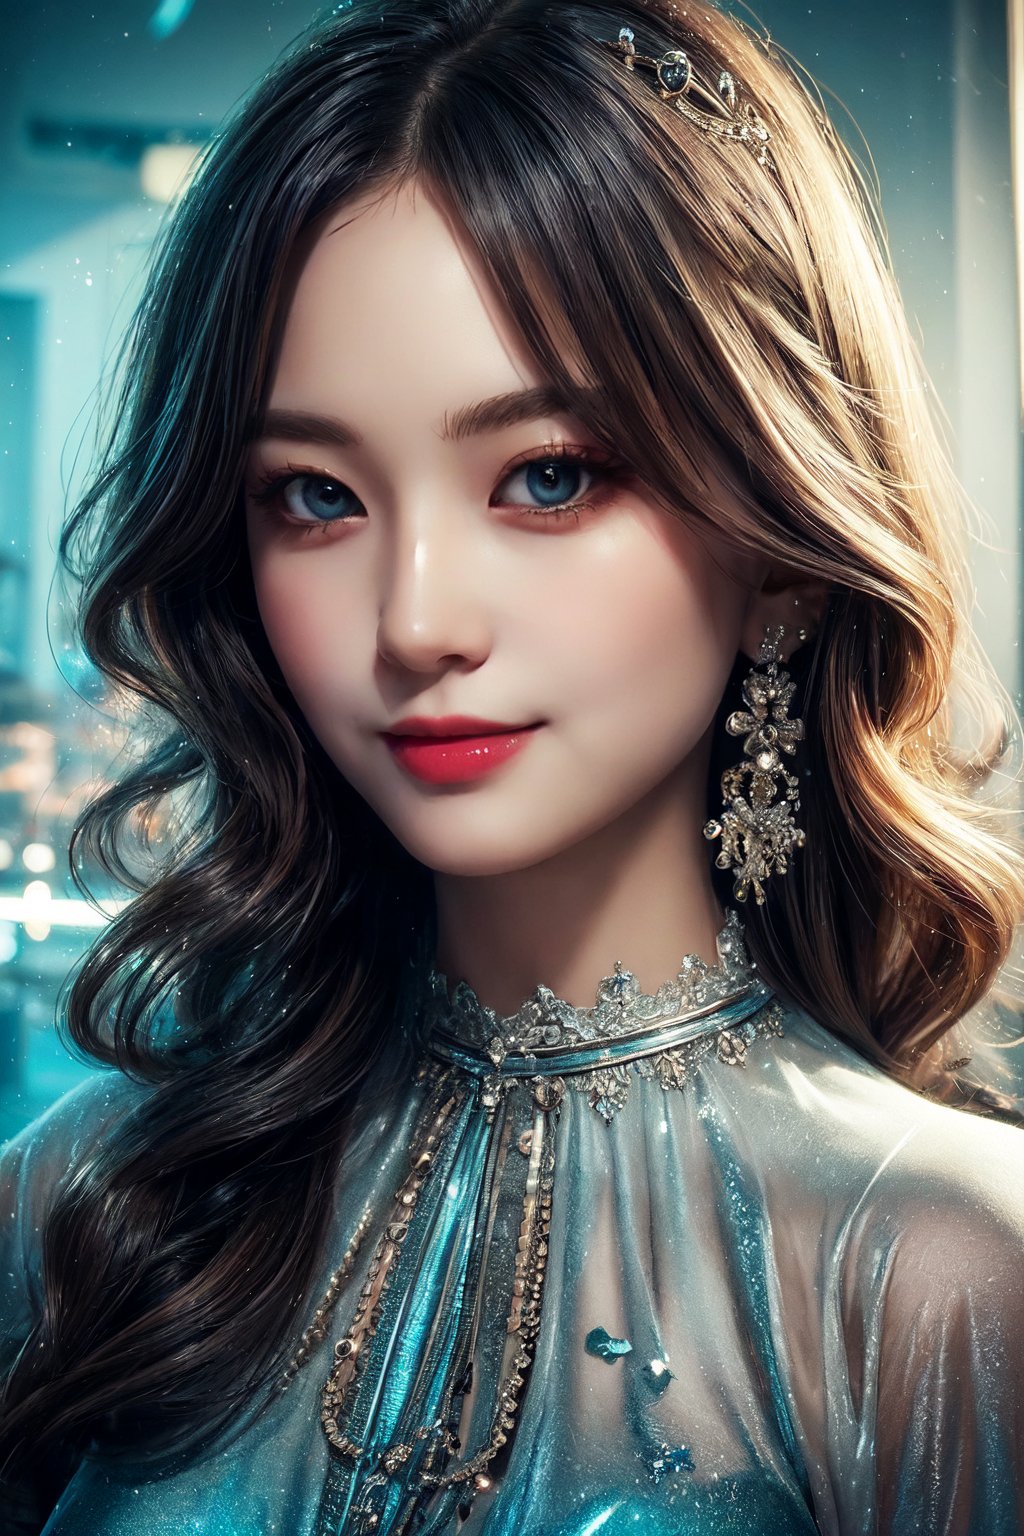 (masterpiece, high quality:1.5), 8K, HDR, 
1girl, well_defined_face, well_defined_eyes, ultra_detailed_eyes, ultra_detailed_face, by FuturEvoLab, 
ethereal lighting, immortal, elegant, porcelain skin, jet-black hair, waves, pale face, ice-blue eyes, blood-red lips, pinhole photograph, retro aesthetic, monochromatic backdrop, mysterious, enigmatic, timeless allure, the siren of the night, secrets, longing, hidden dangers, captivating, nostalgia, timeless fascination, smile, ,Exquisite face